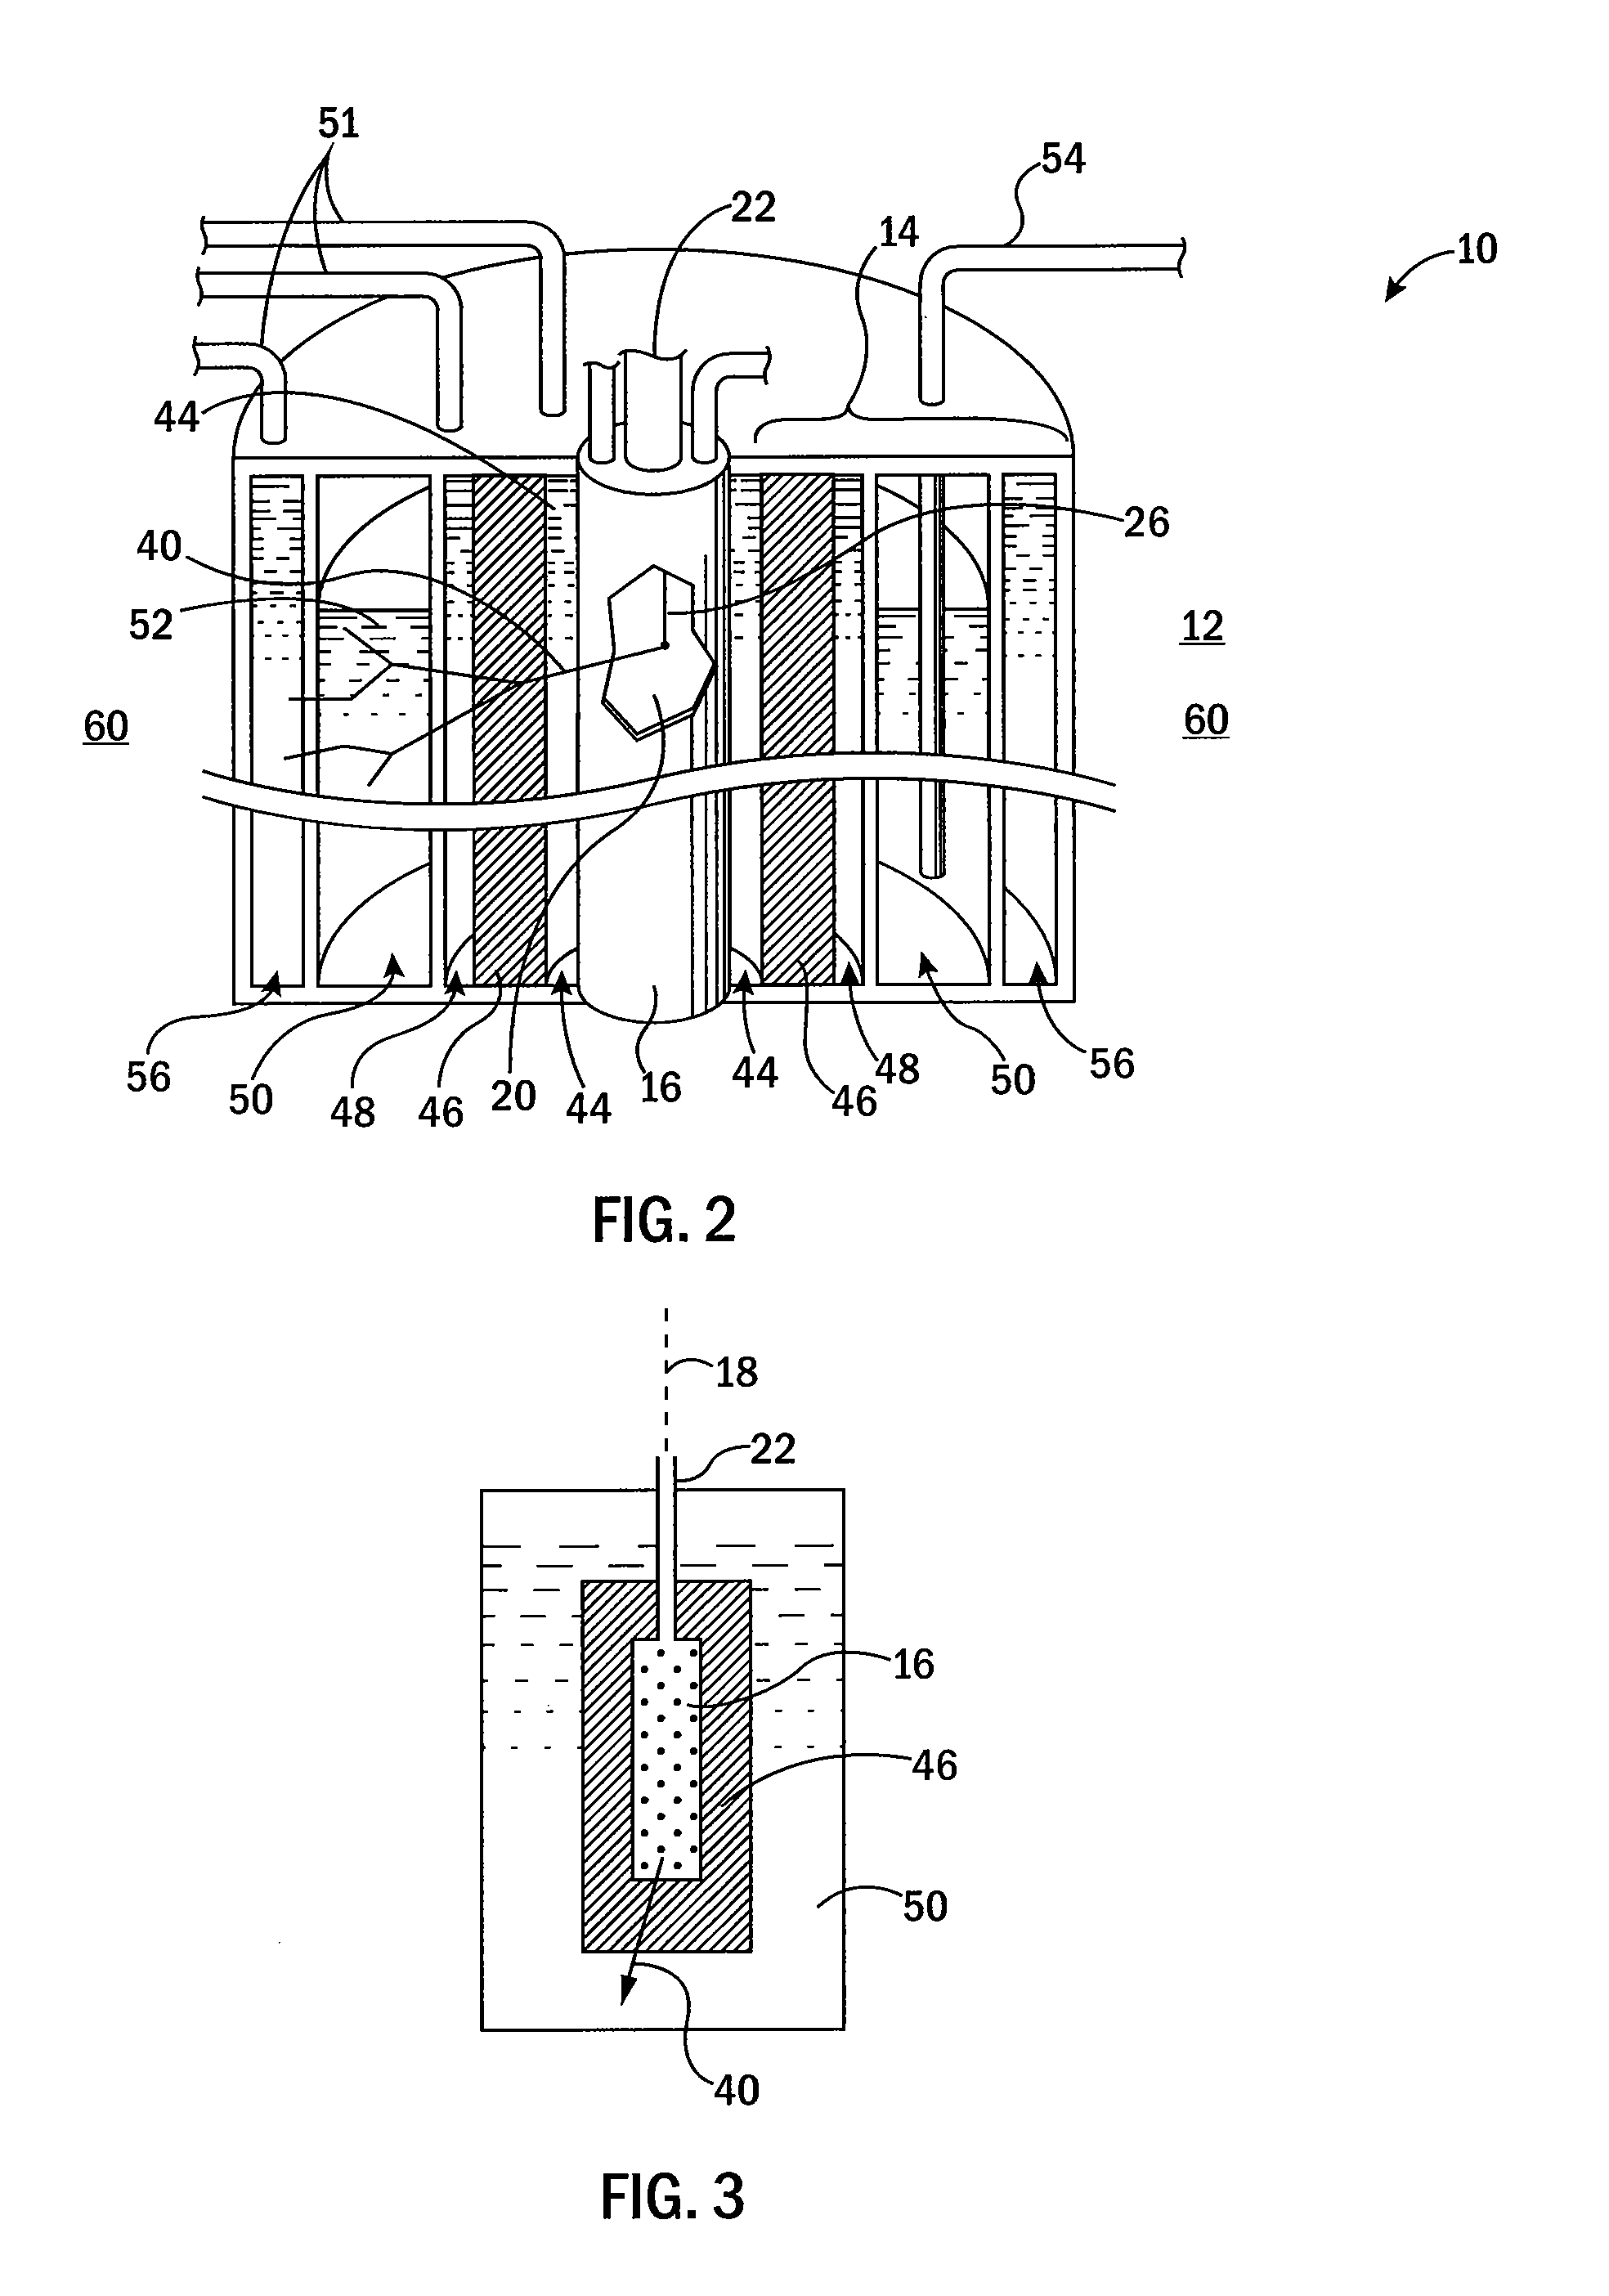 Apparatus and method for generating medical isotopes